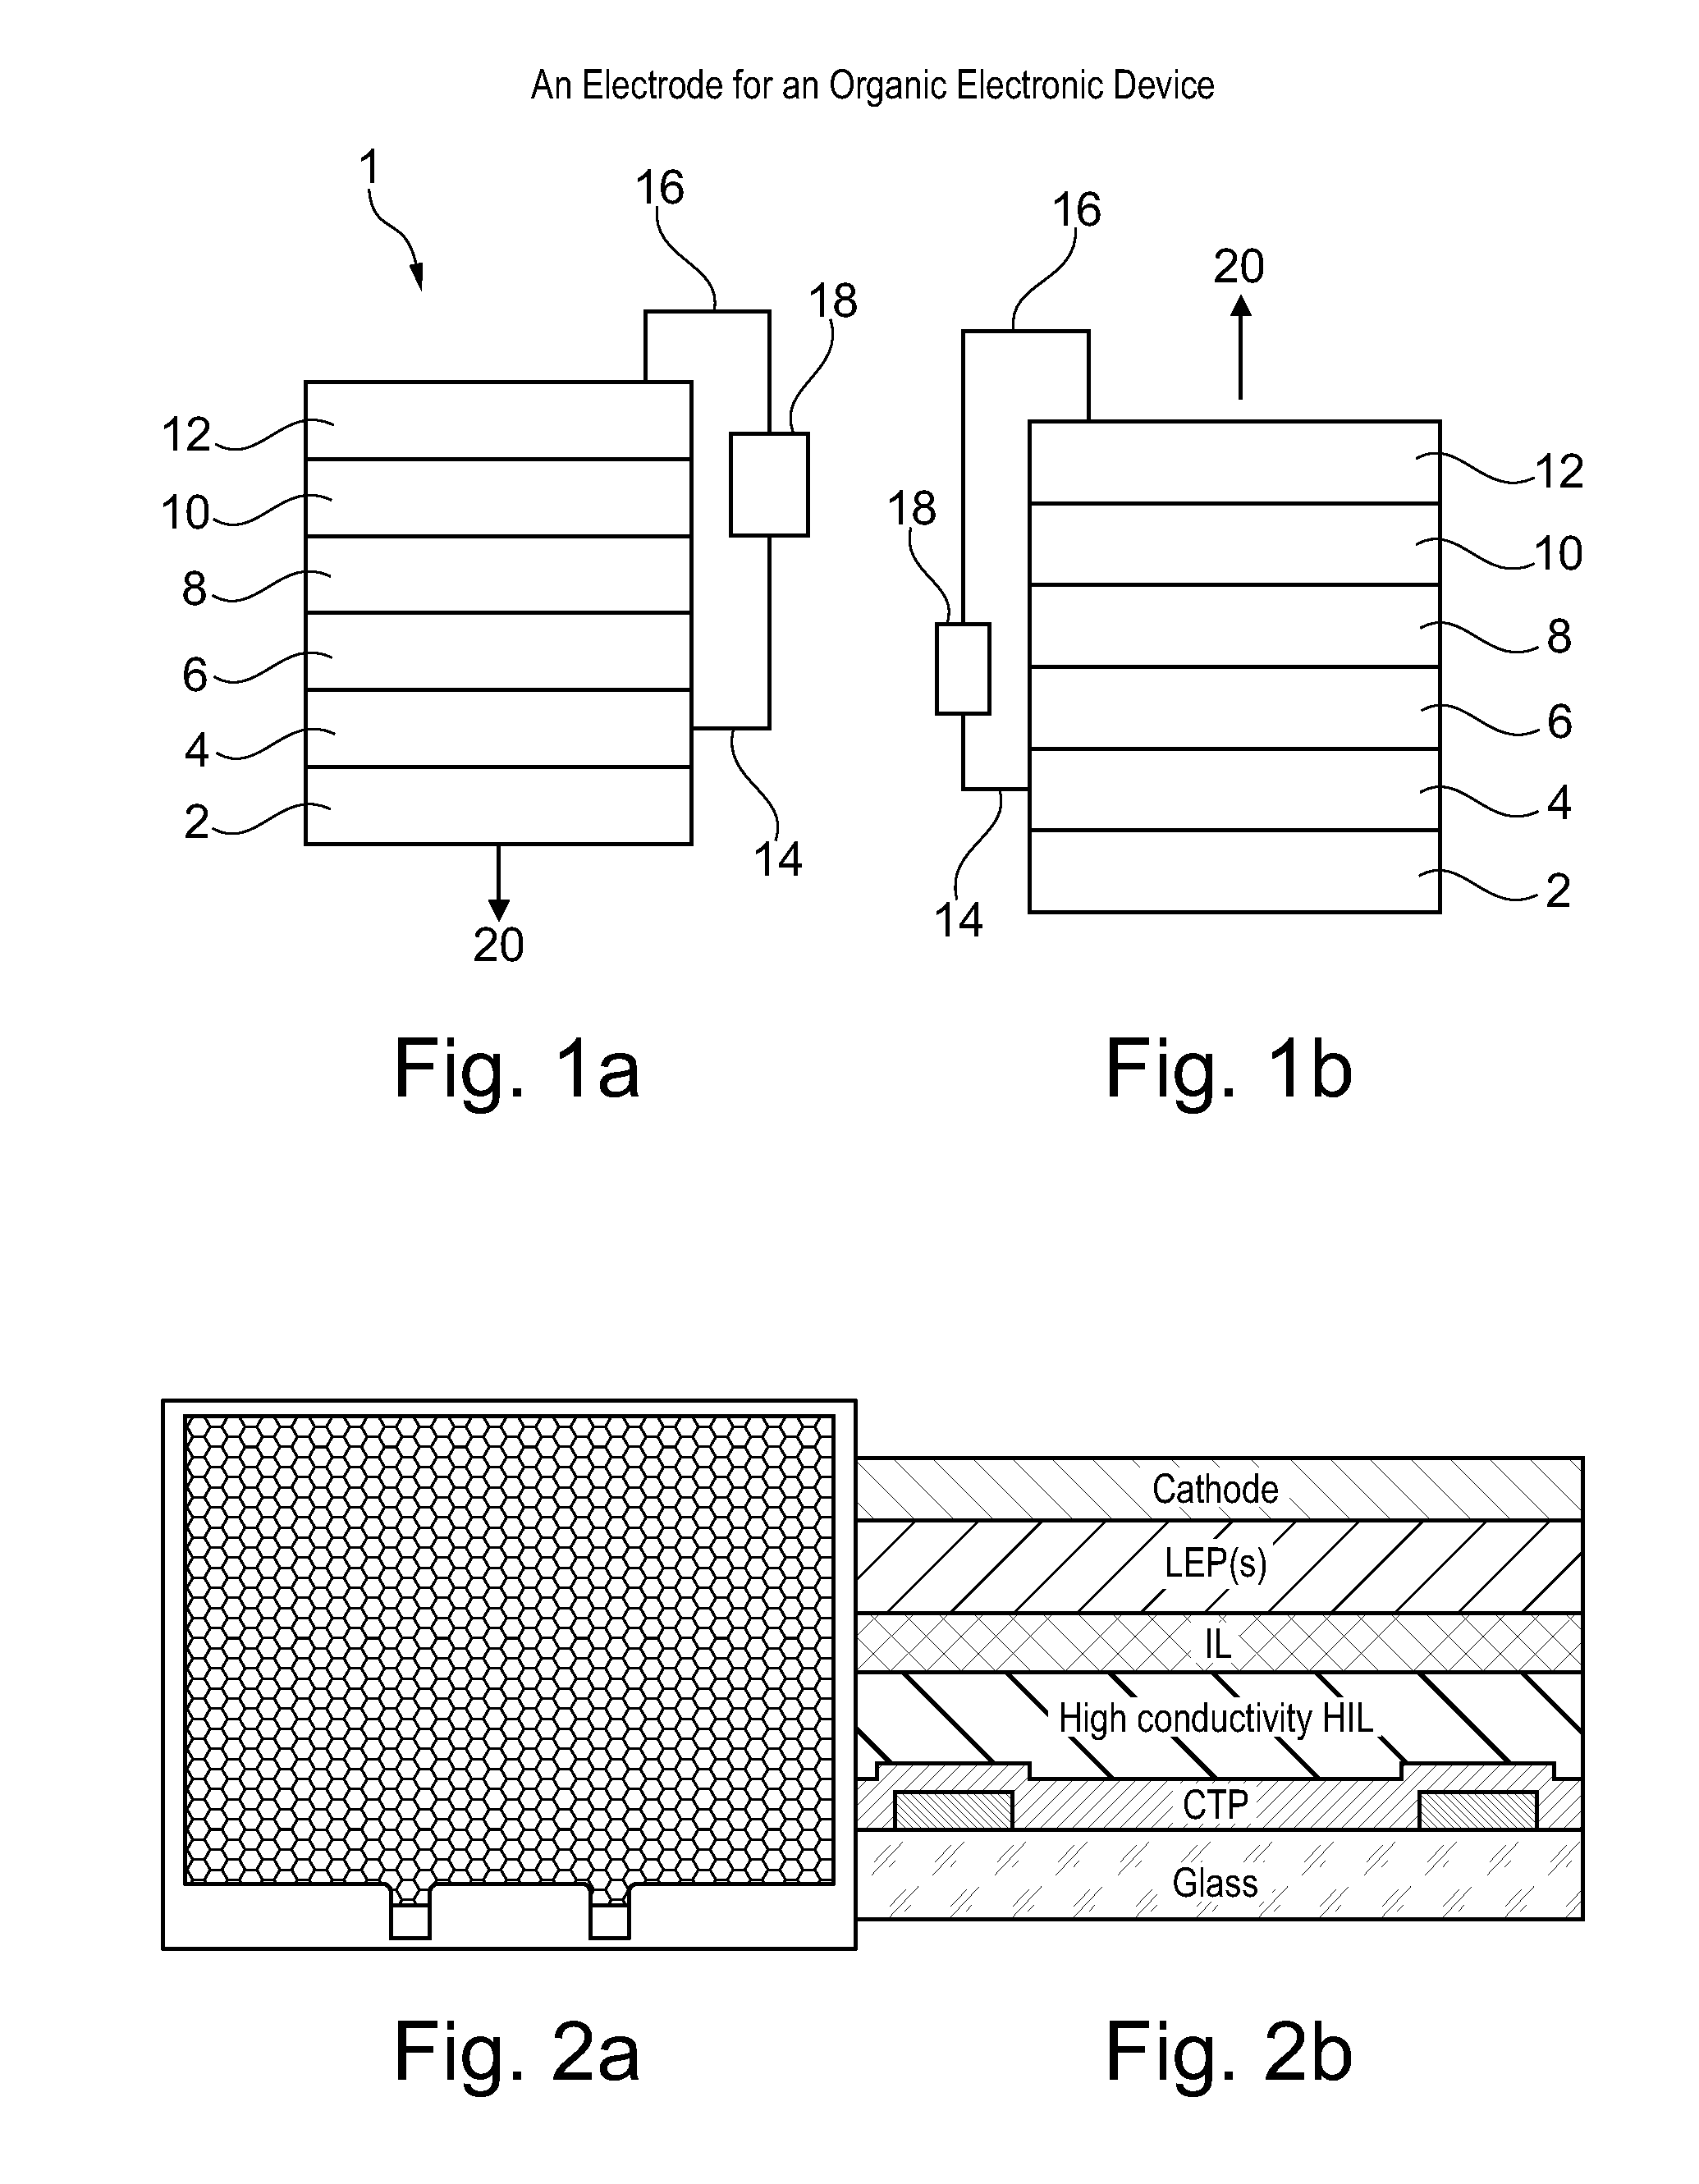 An electrode for an organic electronic device